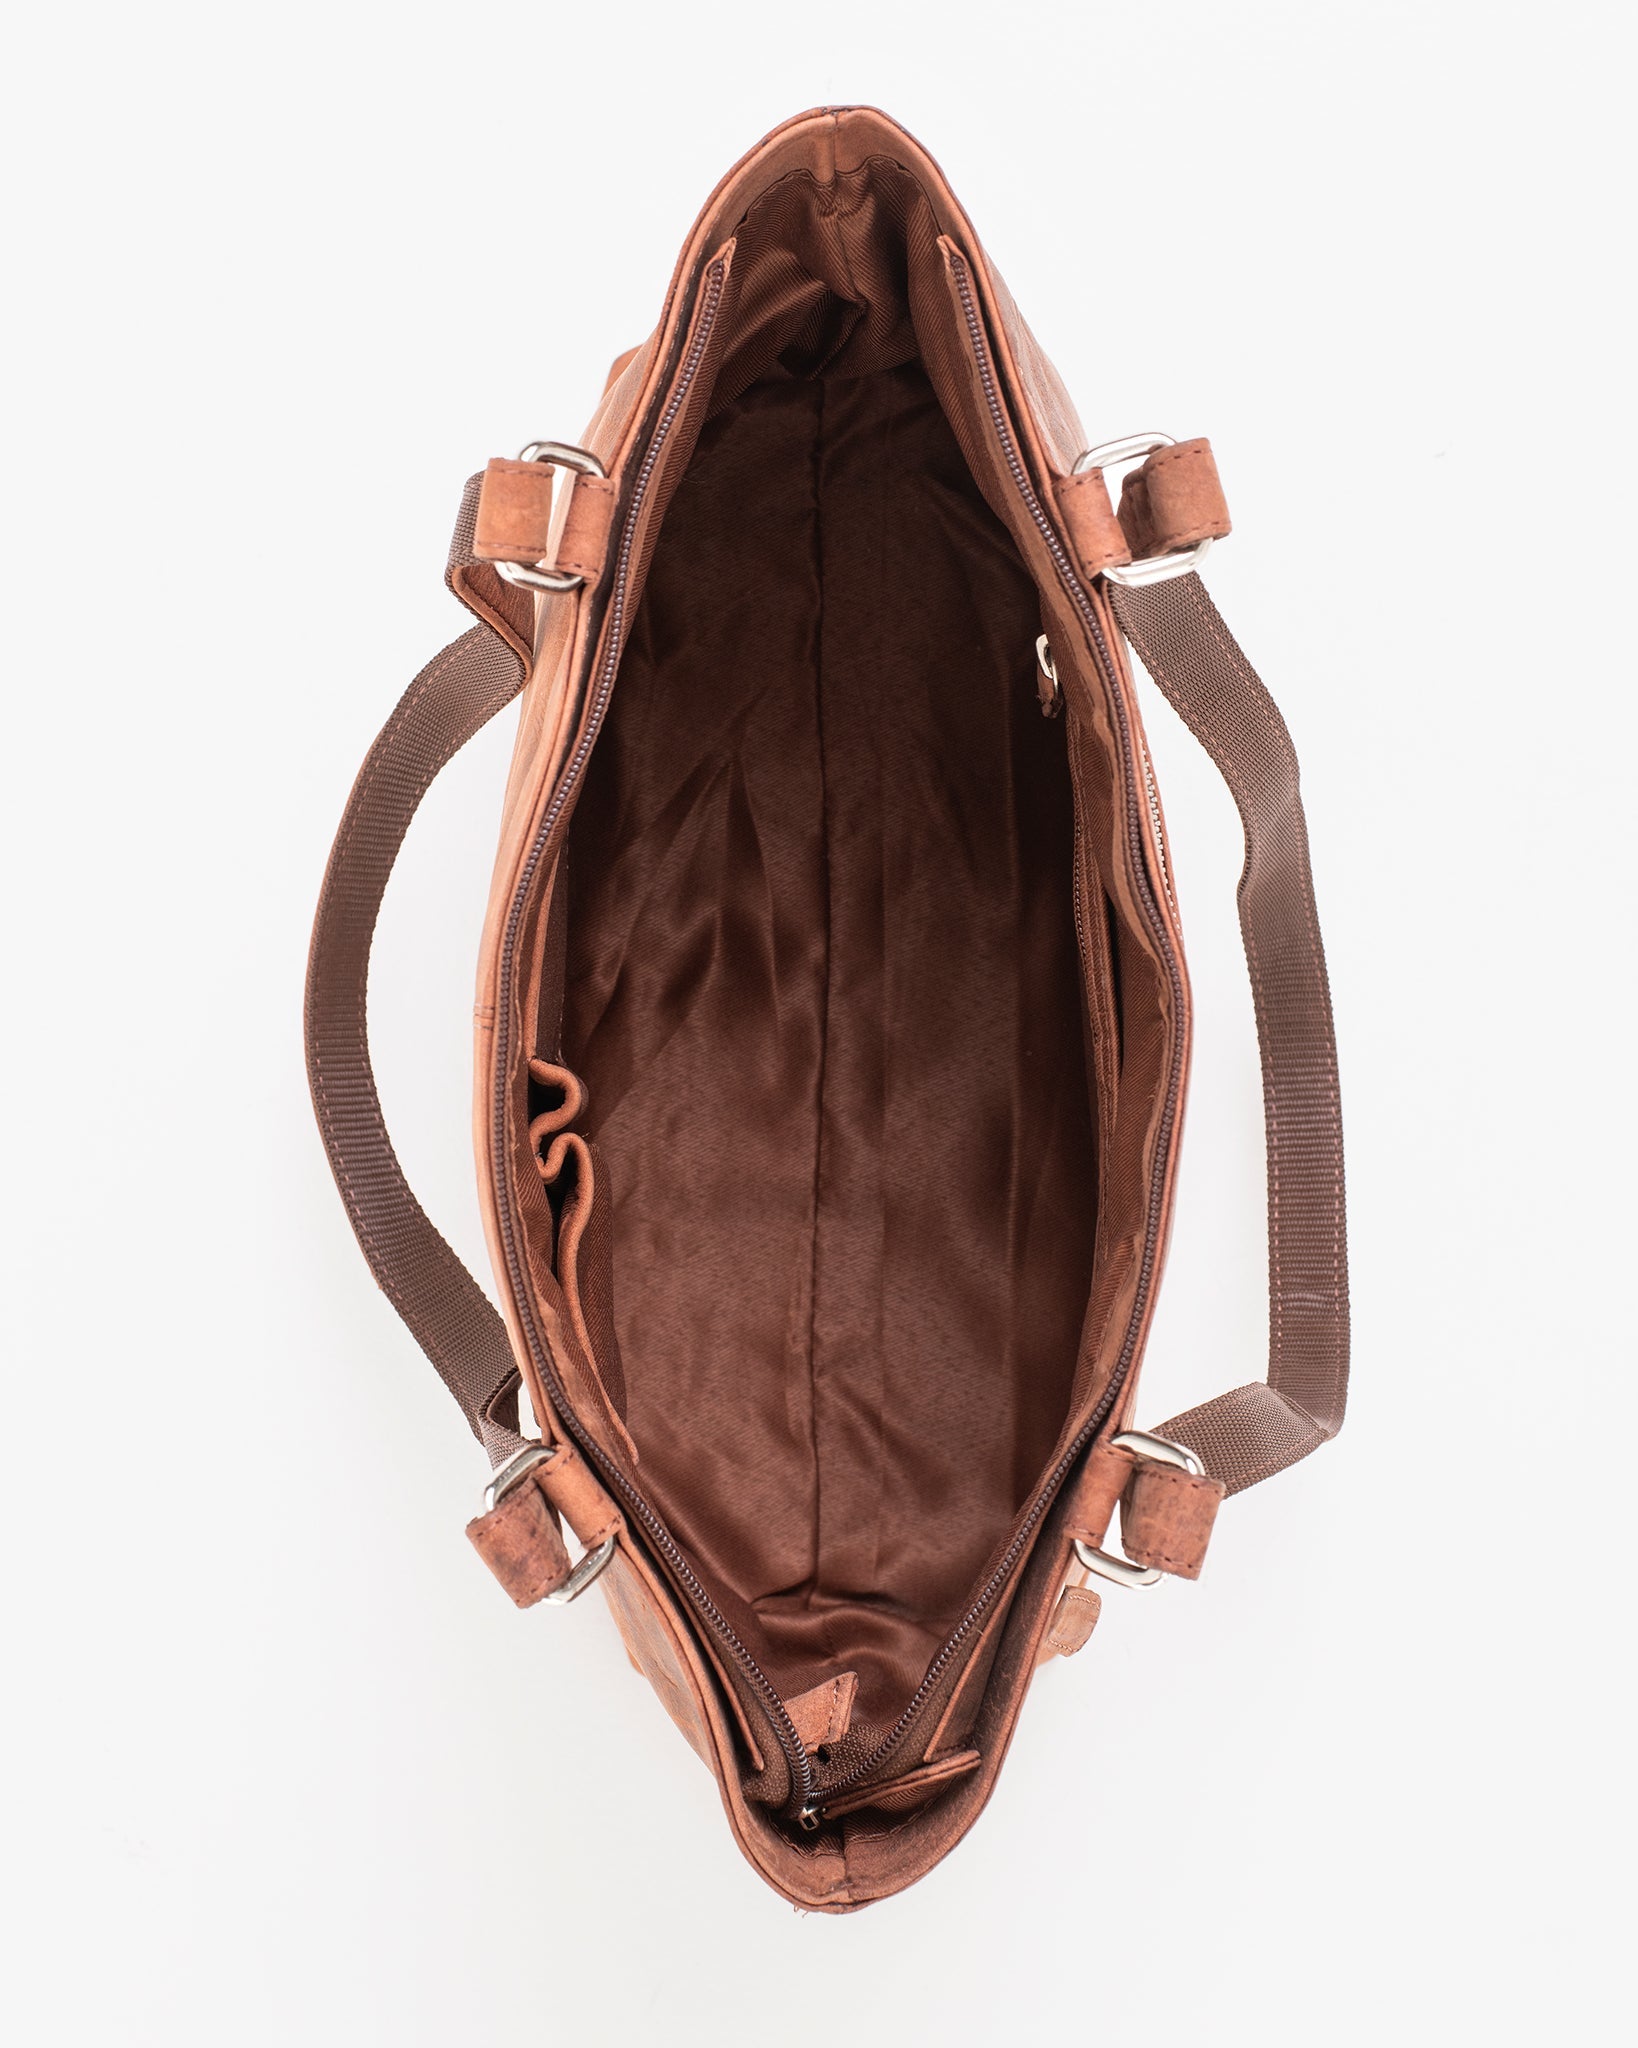 A brown leather shoulder bag with multiple zippered compartments, featuring a close-up of a buckle and detailed stitching. Dimensions: 40 x 26 x 11 cm. Made by Finnish brand Nabo.